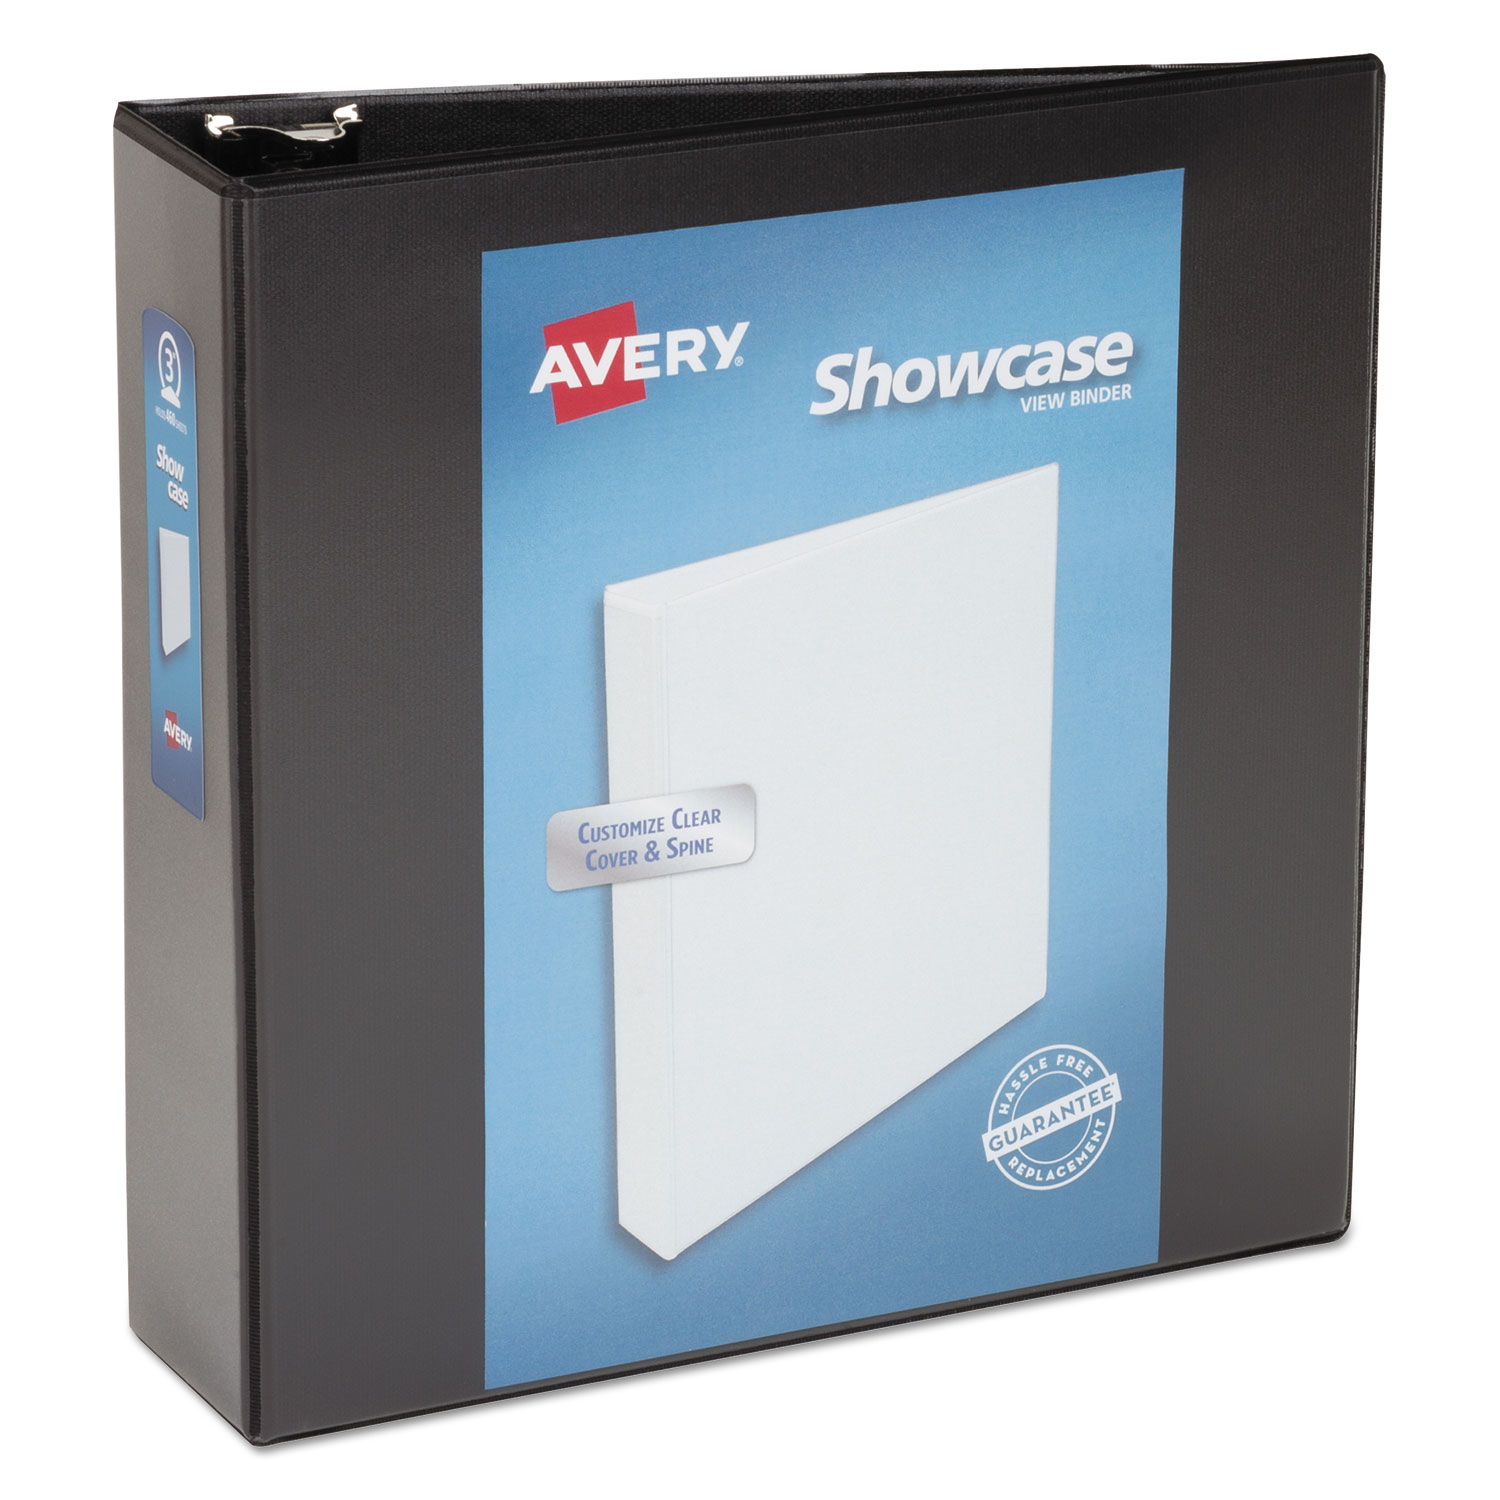  Avery 19750 Showcase Economy View Binder with Round Rings, 3 Rings, 3 Capacity, 11 x 8.5, Black (AVE19750) 